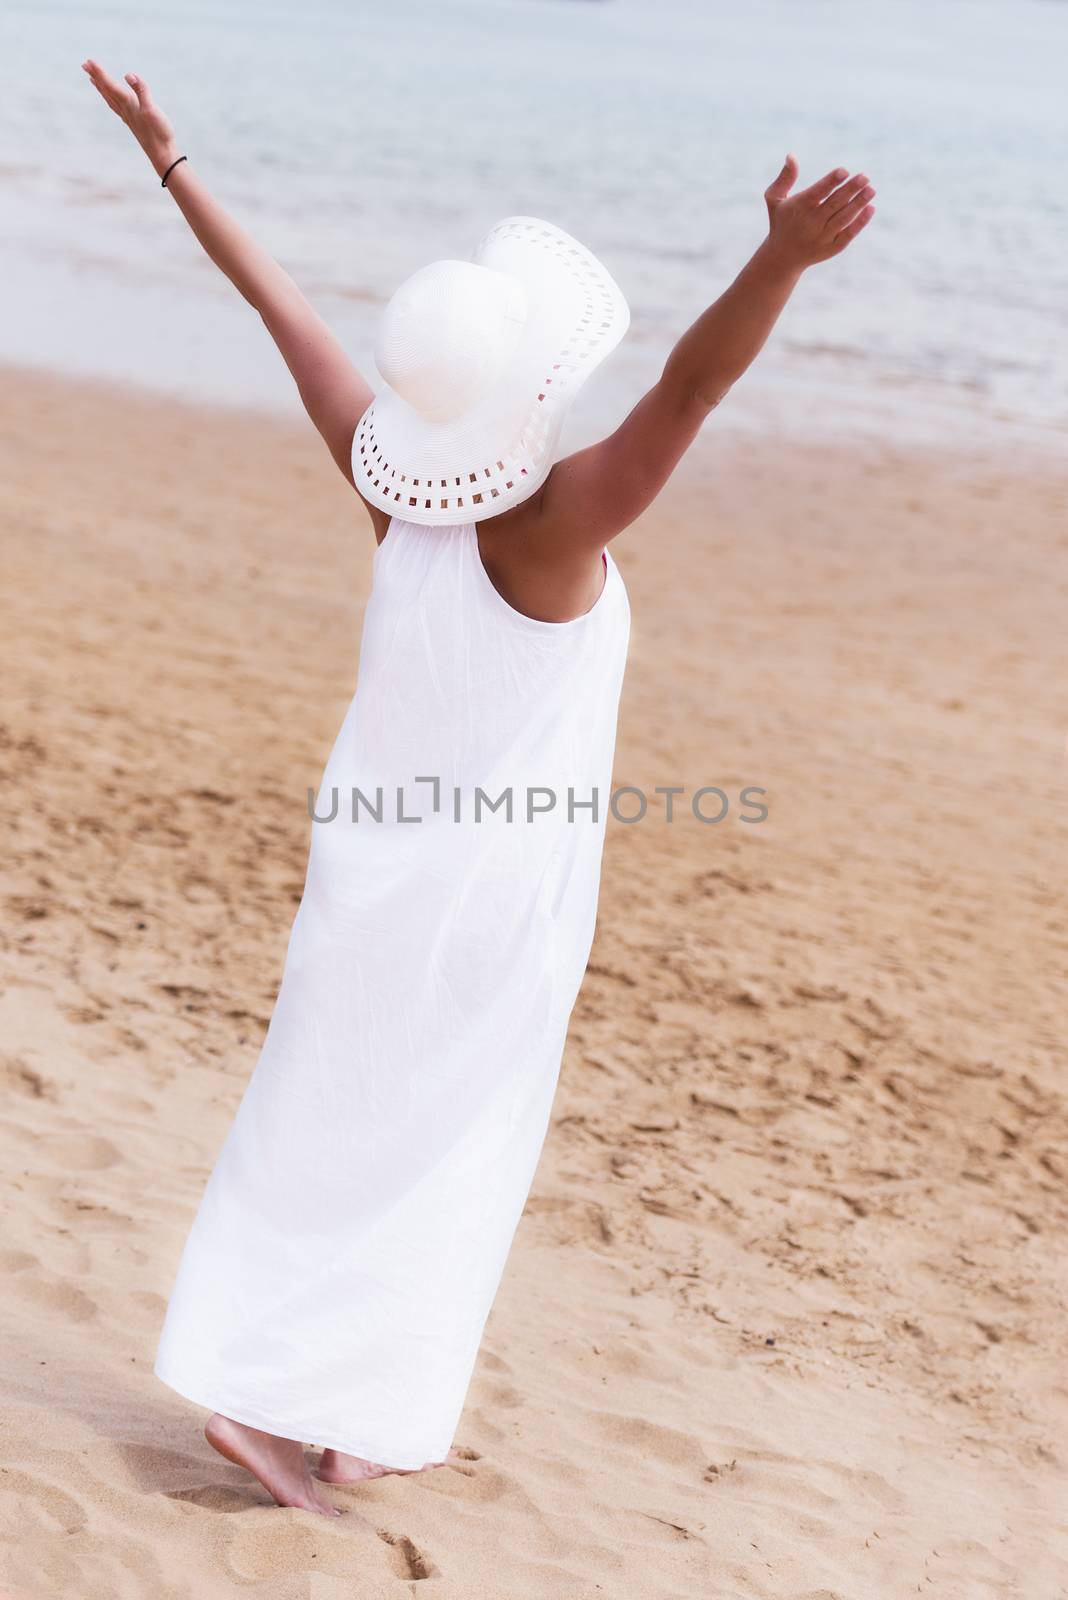 Lone girl in white dress and hat standing on beach with hands up